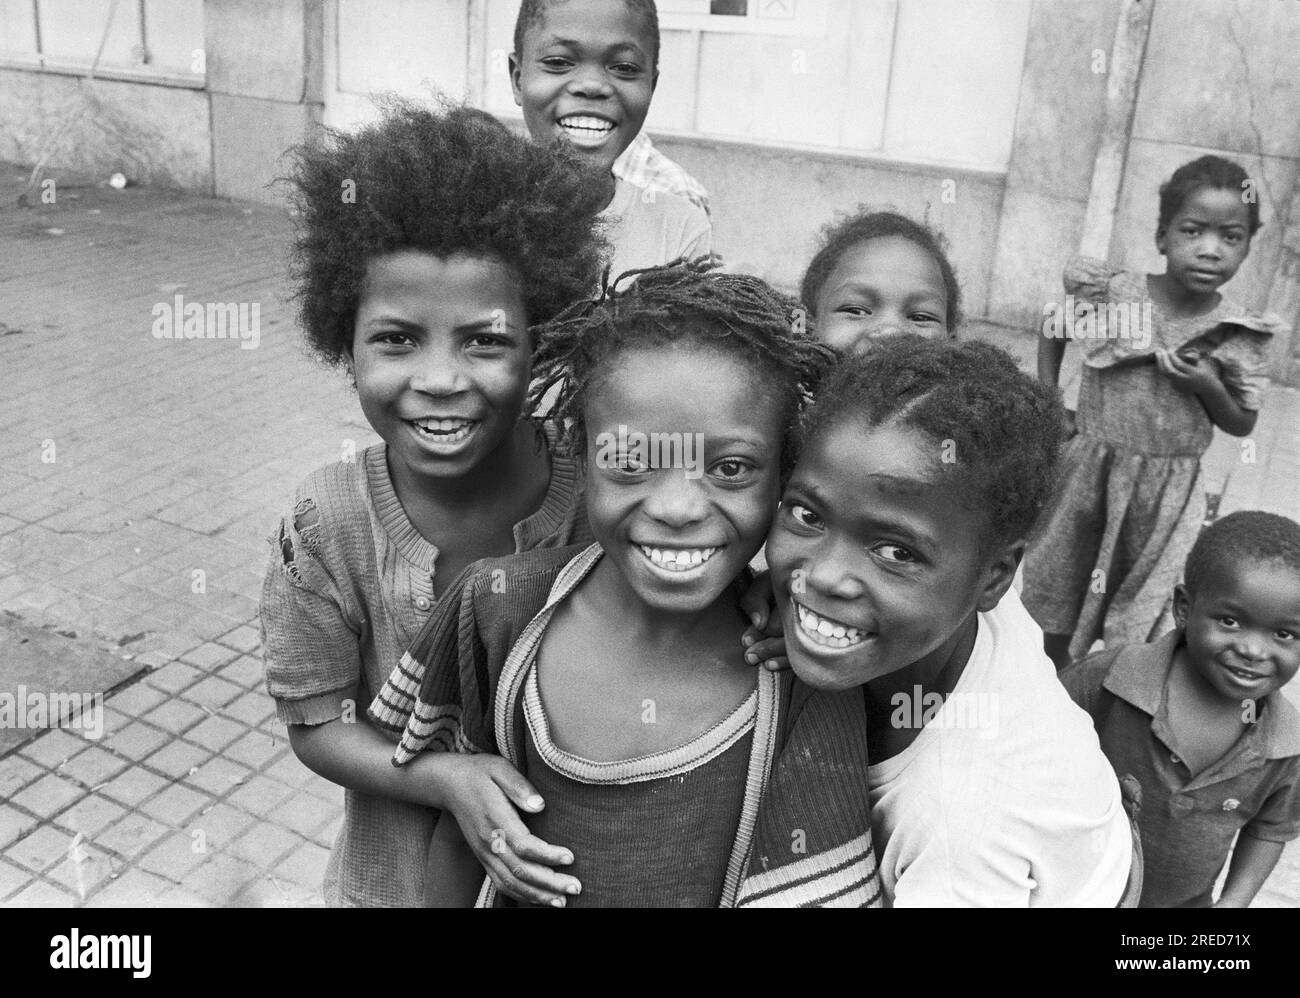 Angola, Huambo, 27/09/1992 Archive: 36-75-18 parliamentary elections Photo: laughing children [automated translation] Stock Photo